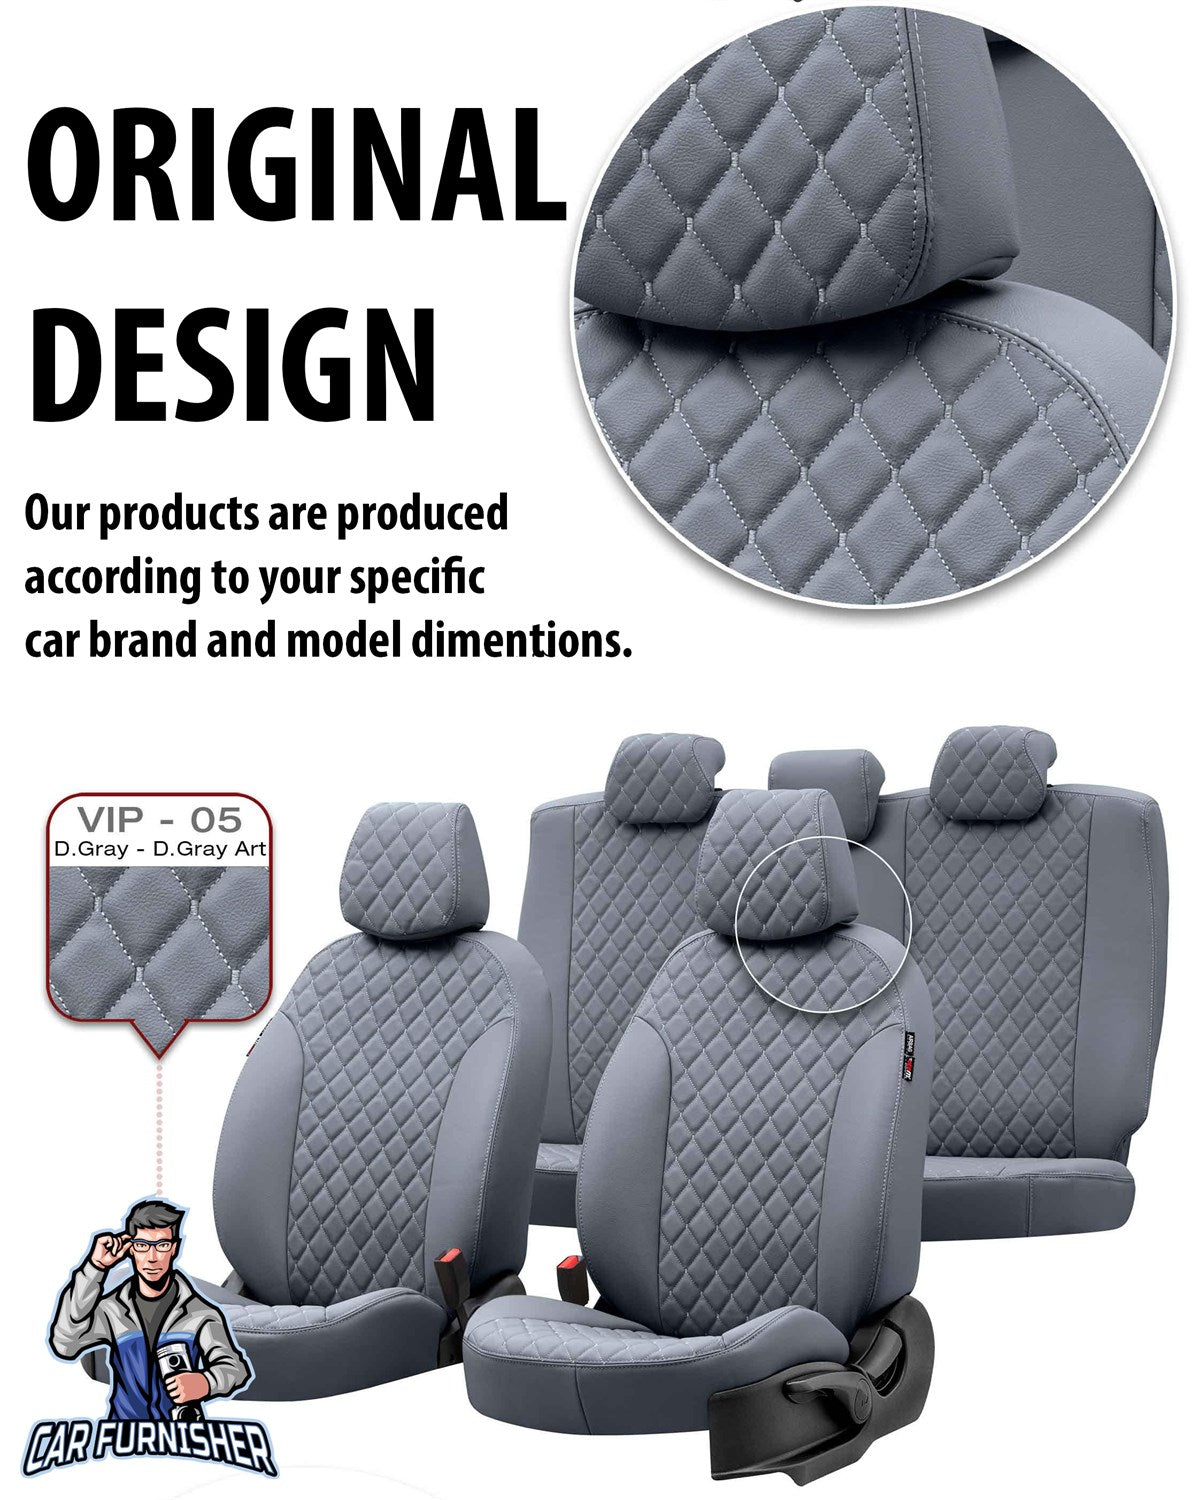 Nissan Pathfinder Seat Cover Madrid Leather Design Blue Leather